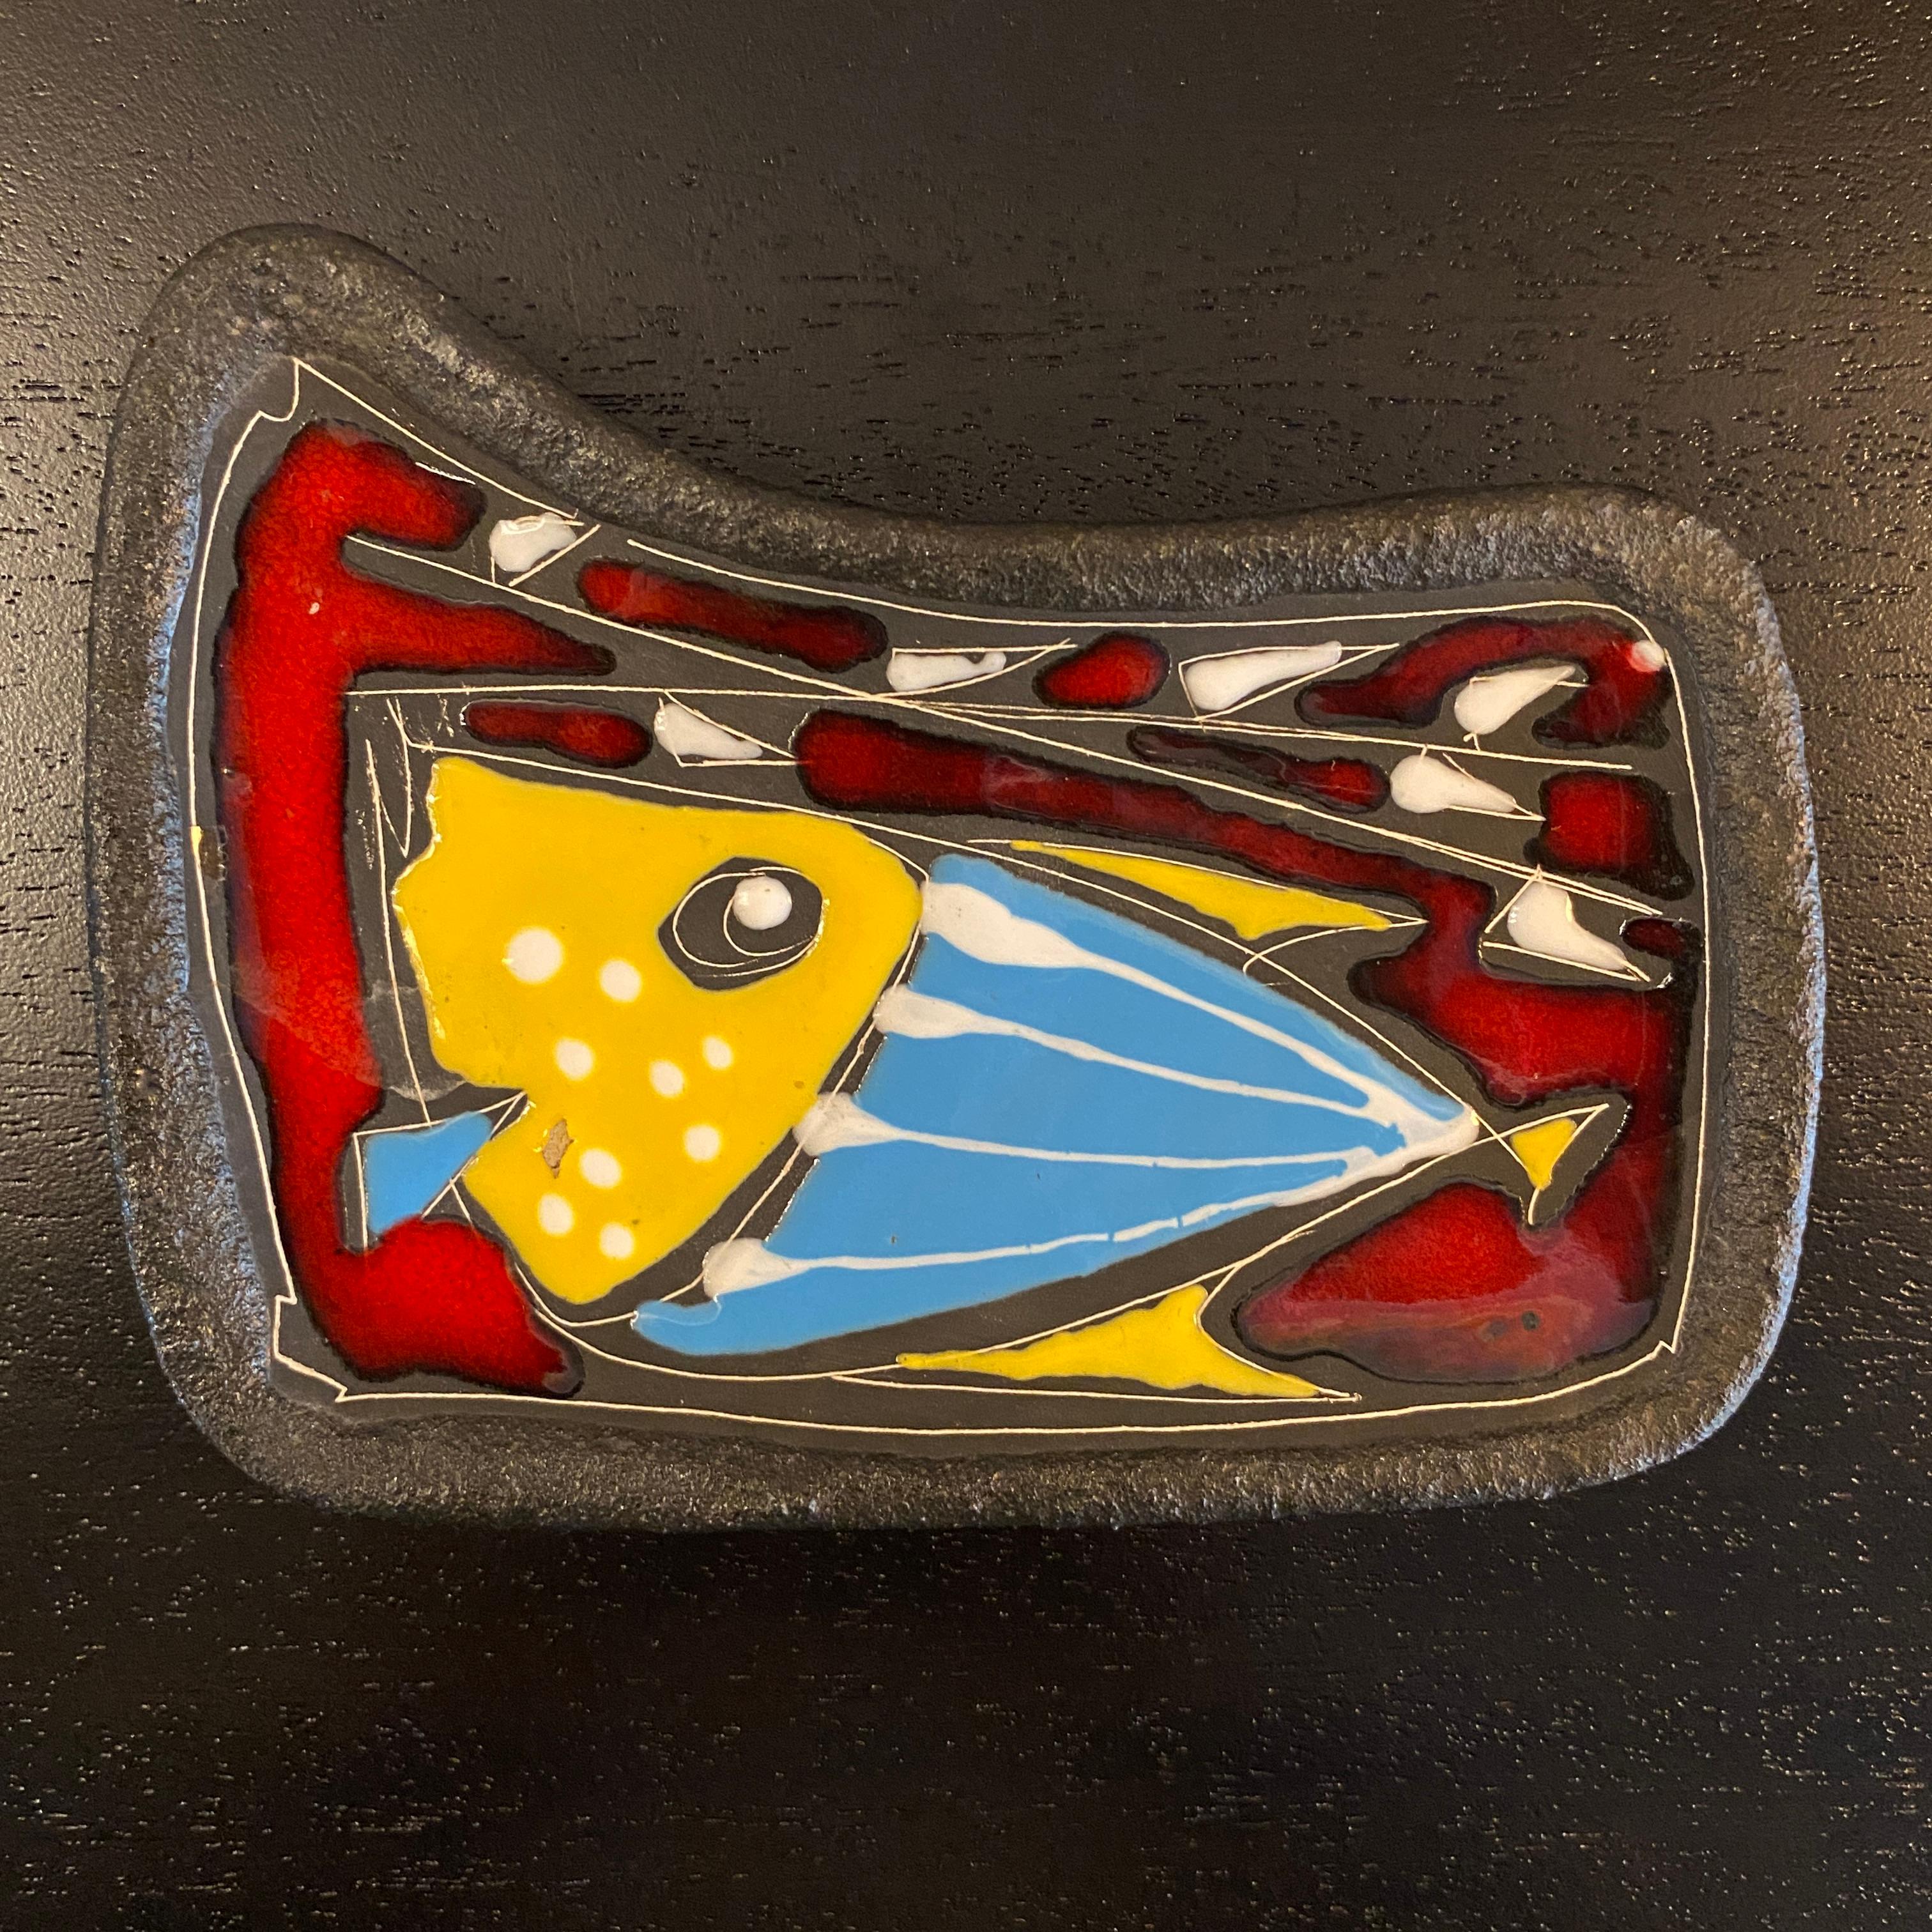 Italian, mid-century modern, art pottery, pin tray features a high glaze, abstract fish design in vibrant yellow, blue, and red hand painted on to the rough textured, charcoal colored surface for a wonderful contrast. Perfect as a pin tray, ring